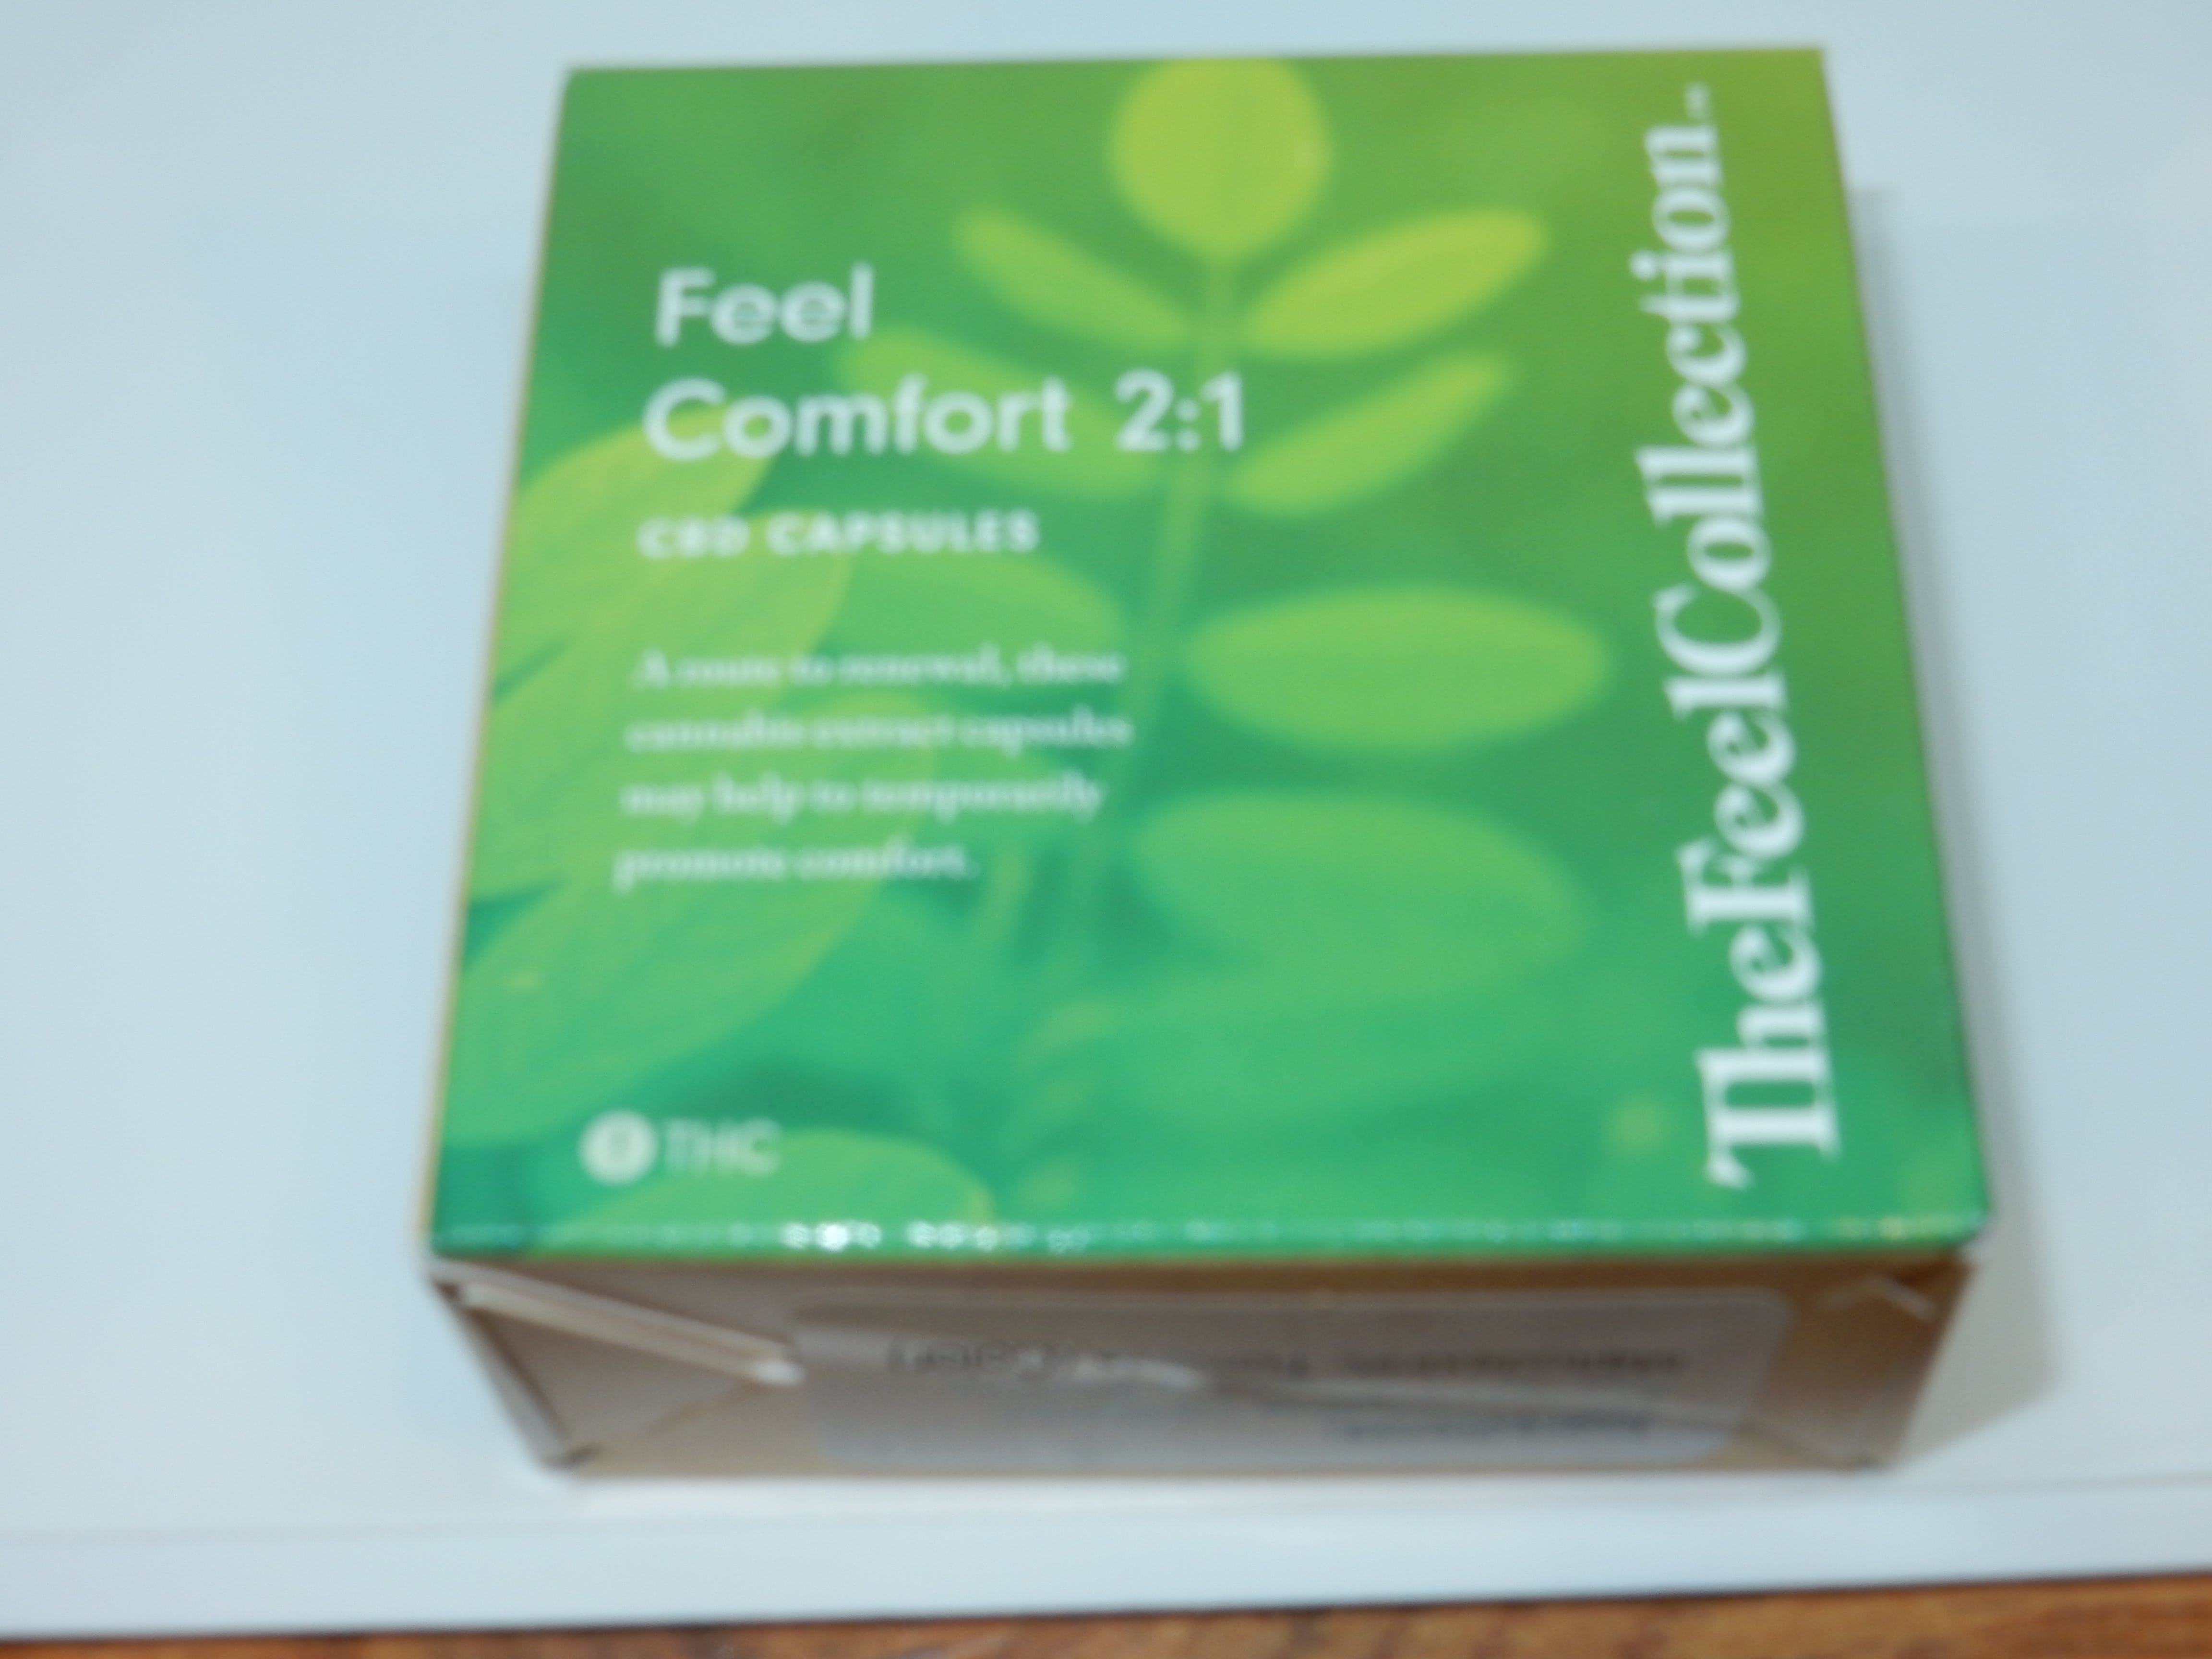 tincture-thefeelcollection-feel-comfort-21-capsules